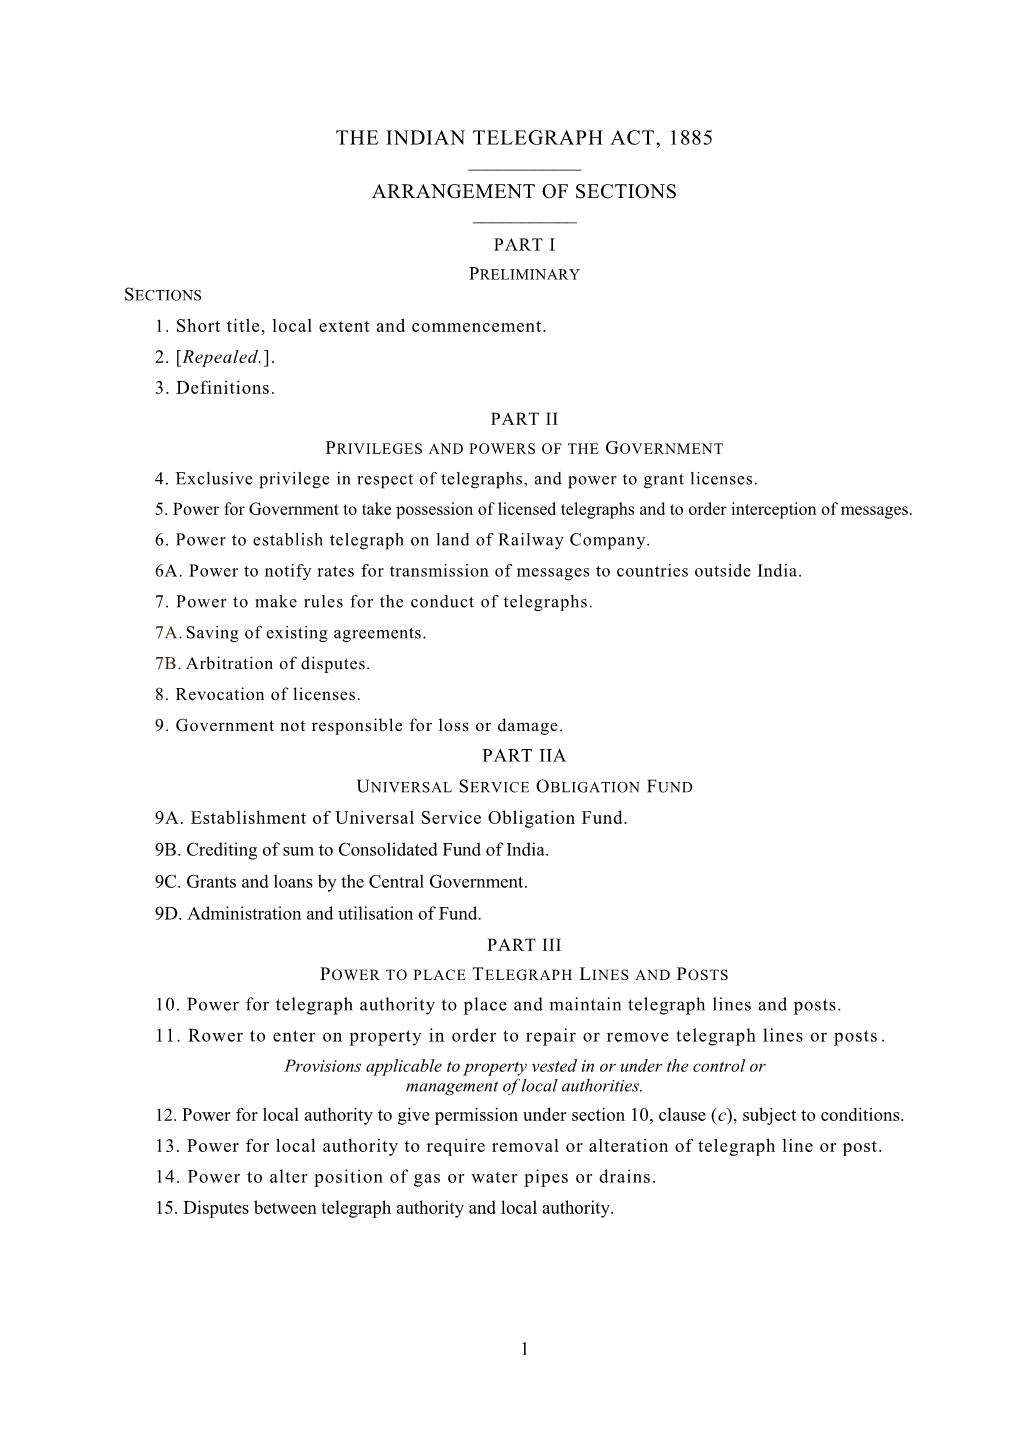 The Indian Telegraph Act, 1885 Arrangement of Sections